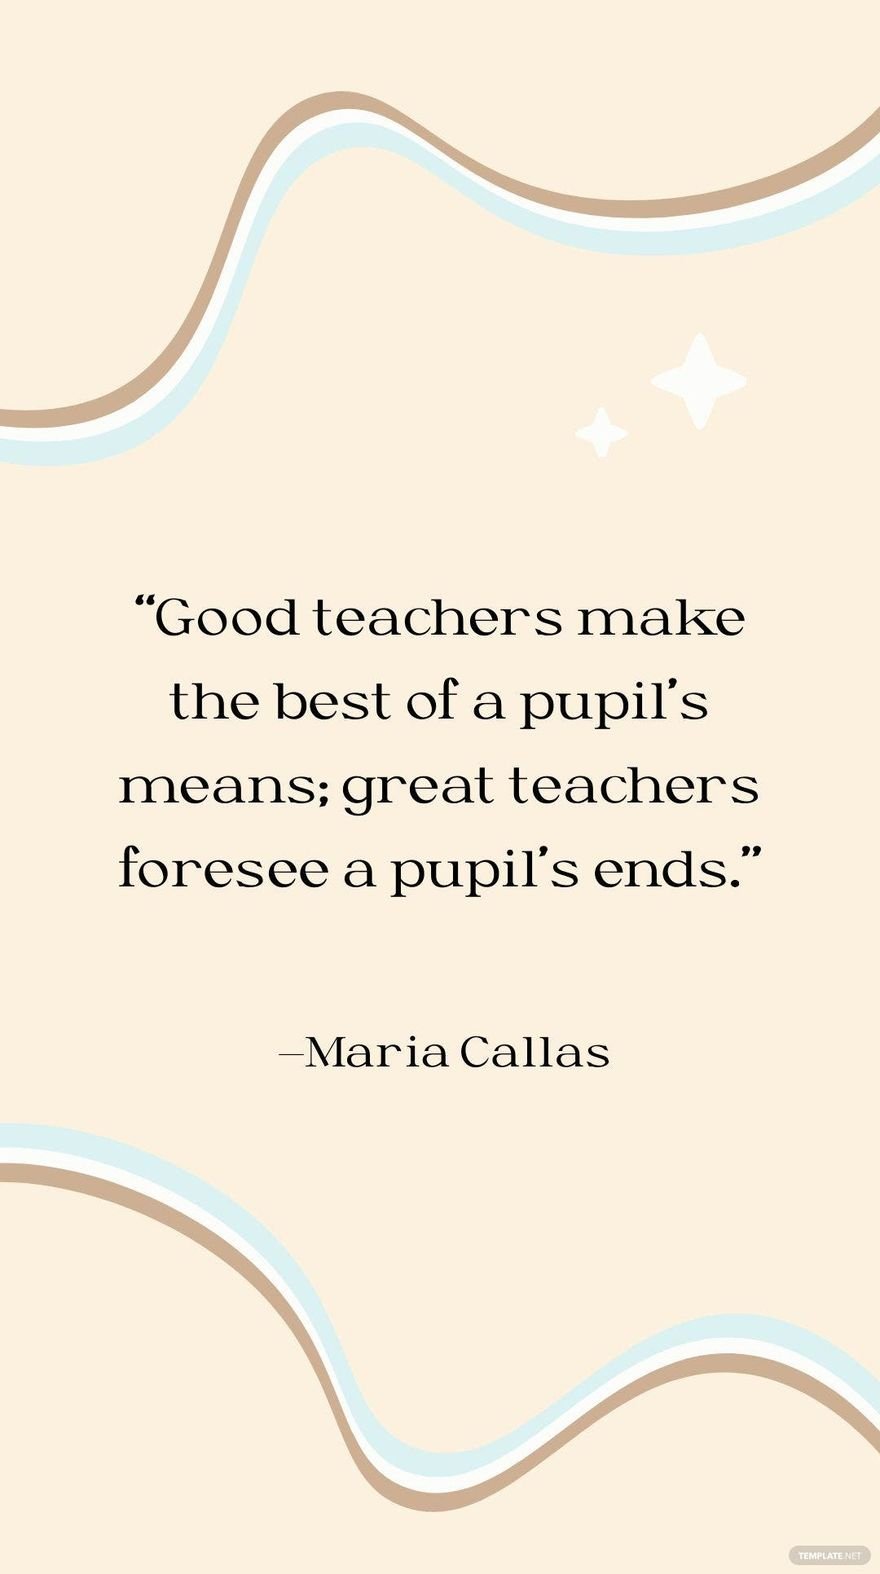 Maria Callas - Good teachers make the best of a pupil’s means; great teachers foresee a pupil’s ends.